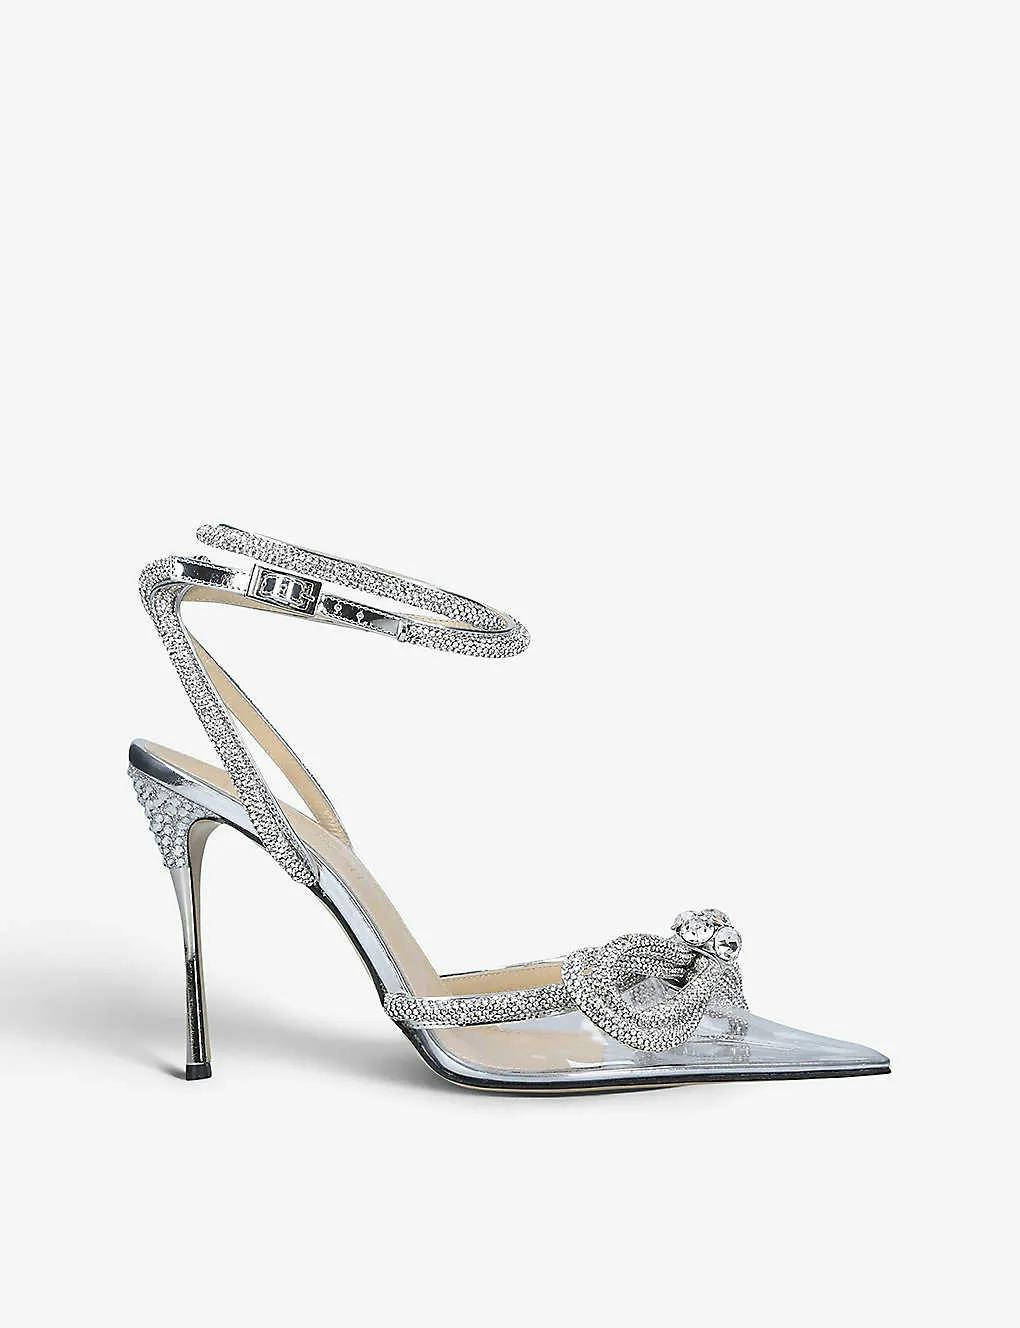 A silver high-heeled pump with a pointed toe, adorned with intricate rhinestones. The design features an ankle strap with sparkling embellishments and a decorative rhinestone bow on the front, creating an elegant and glamorous appearance.